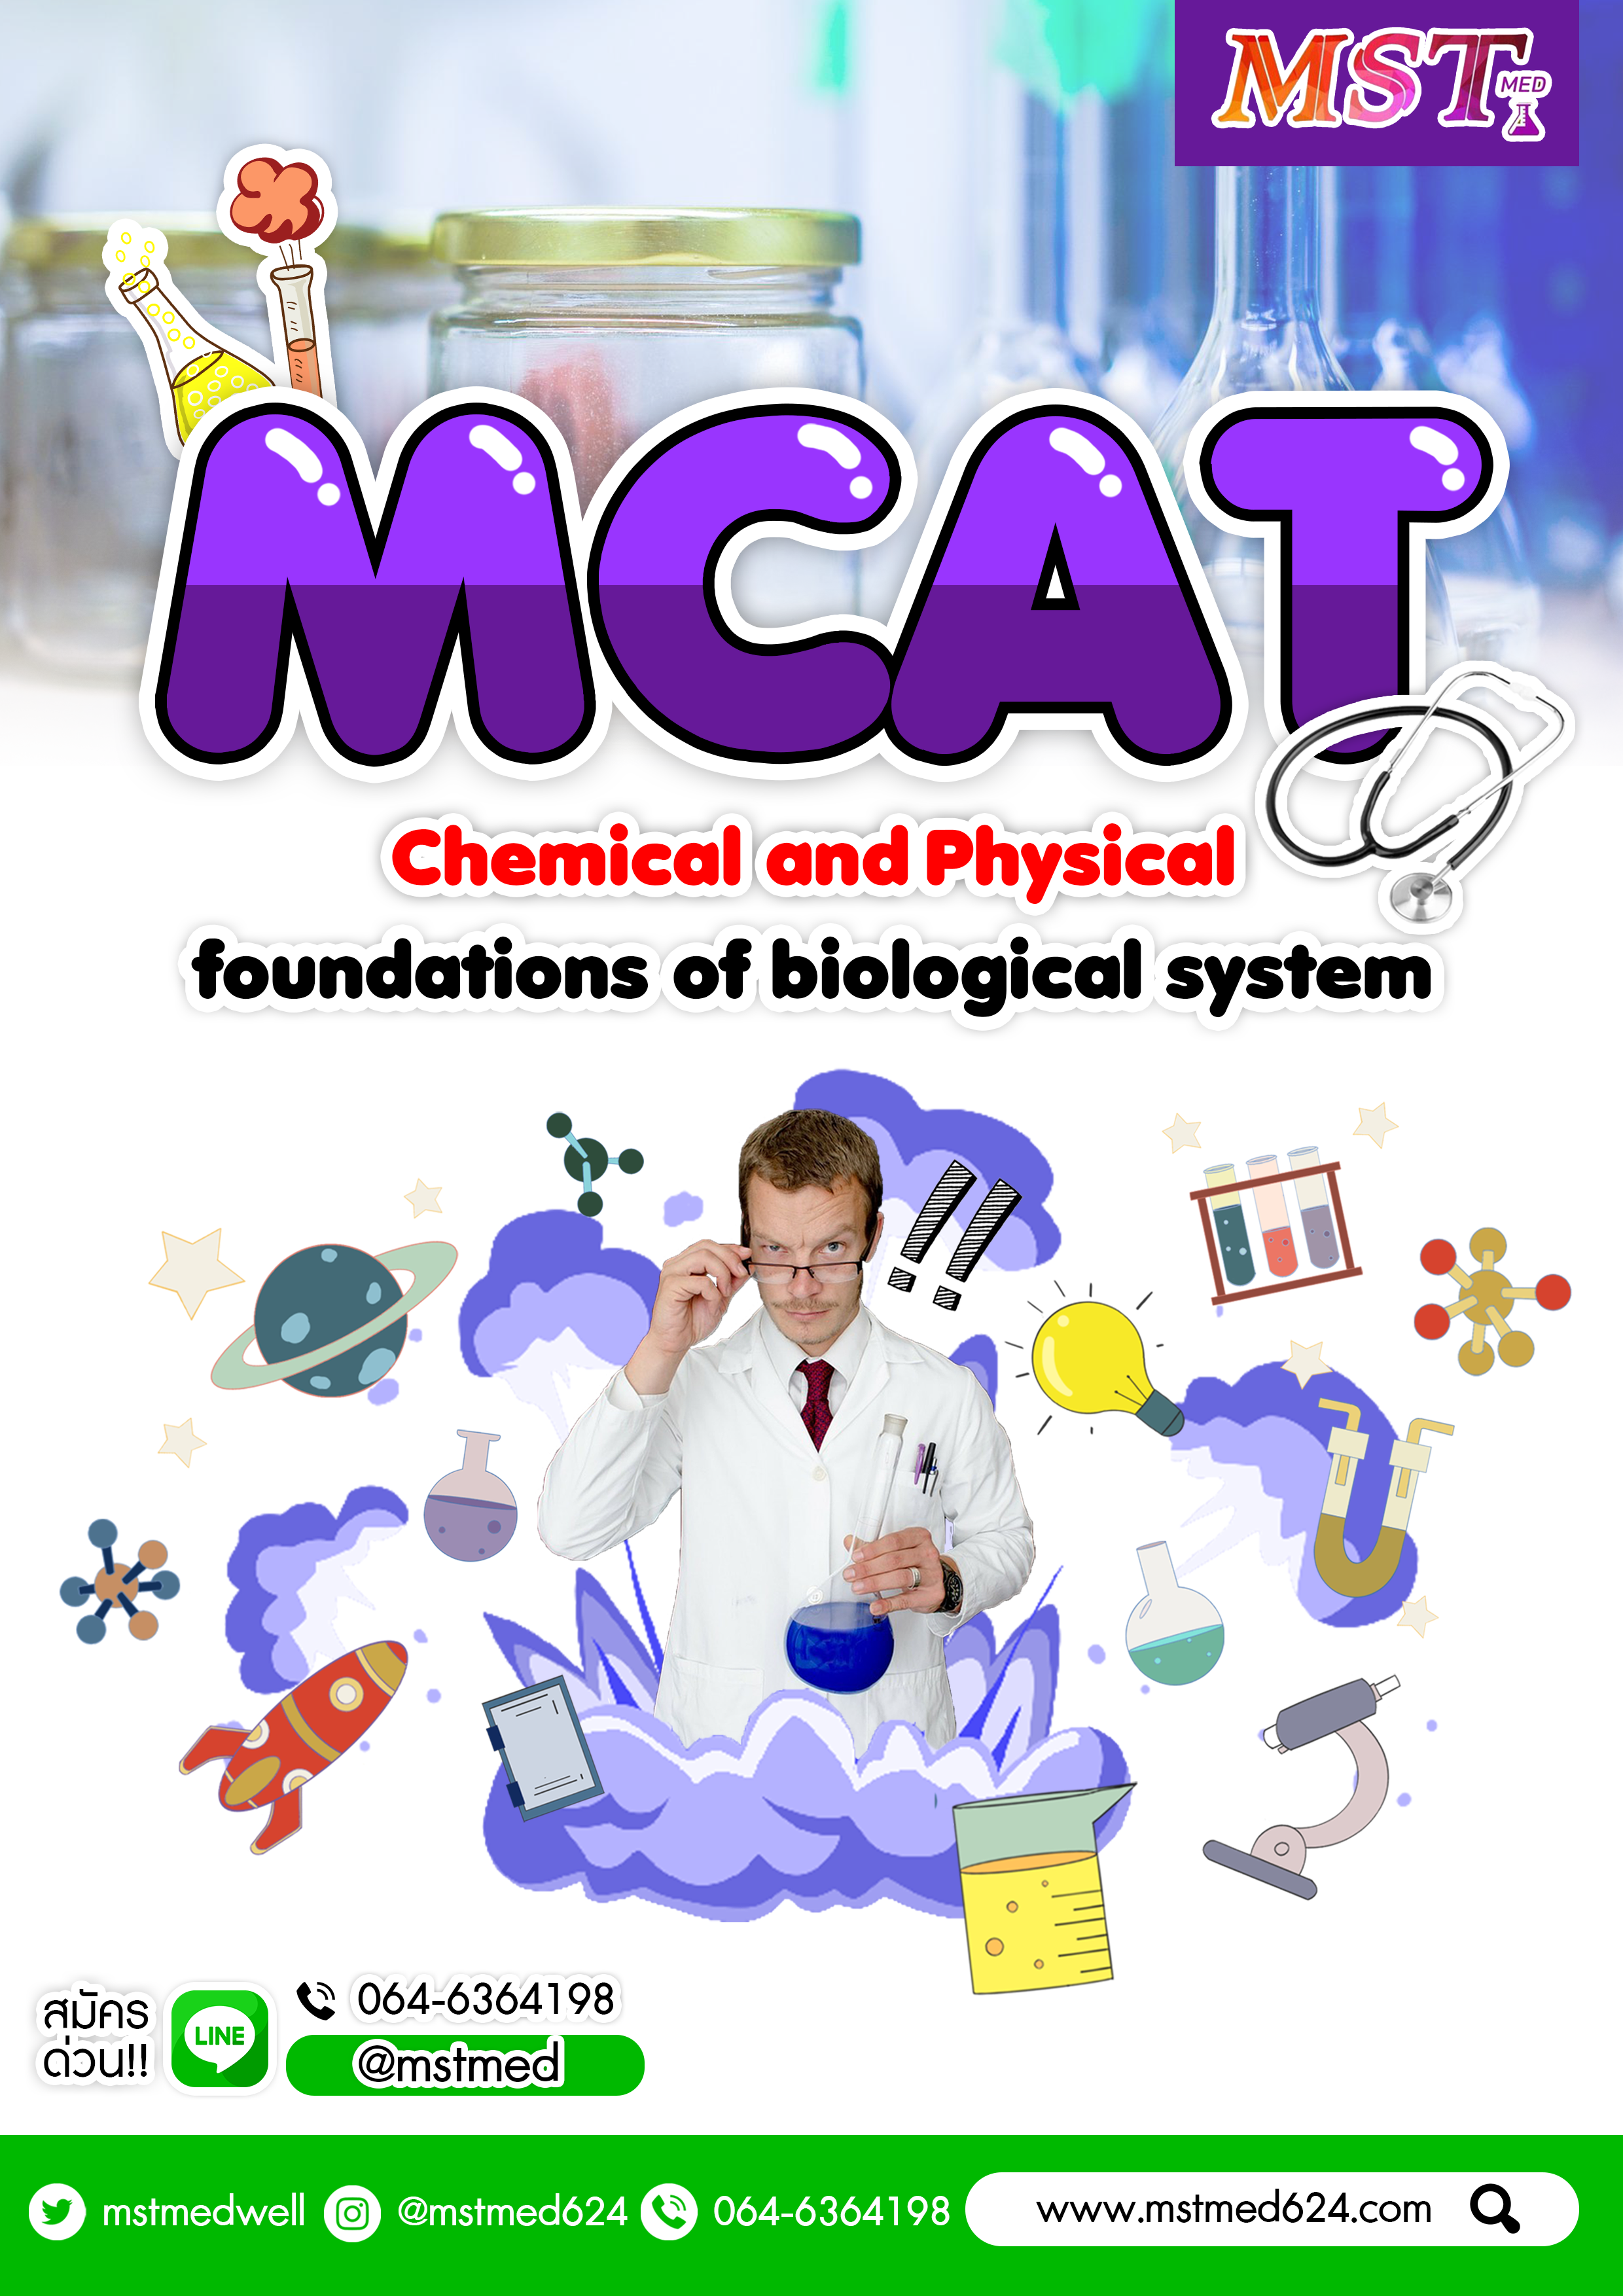 3. Chemical and Physical Foundations of Biological Systems